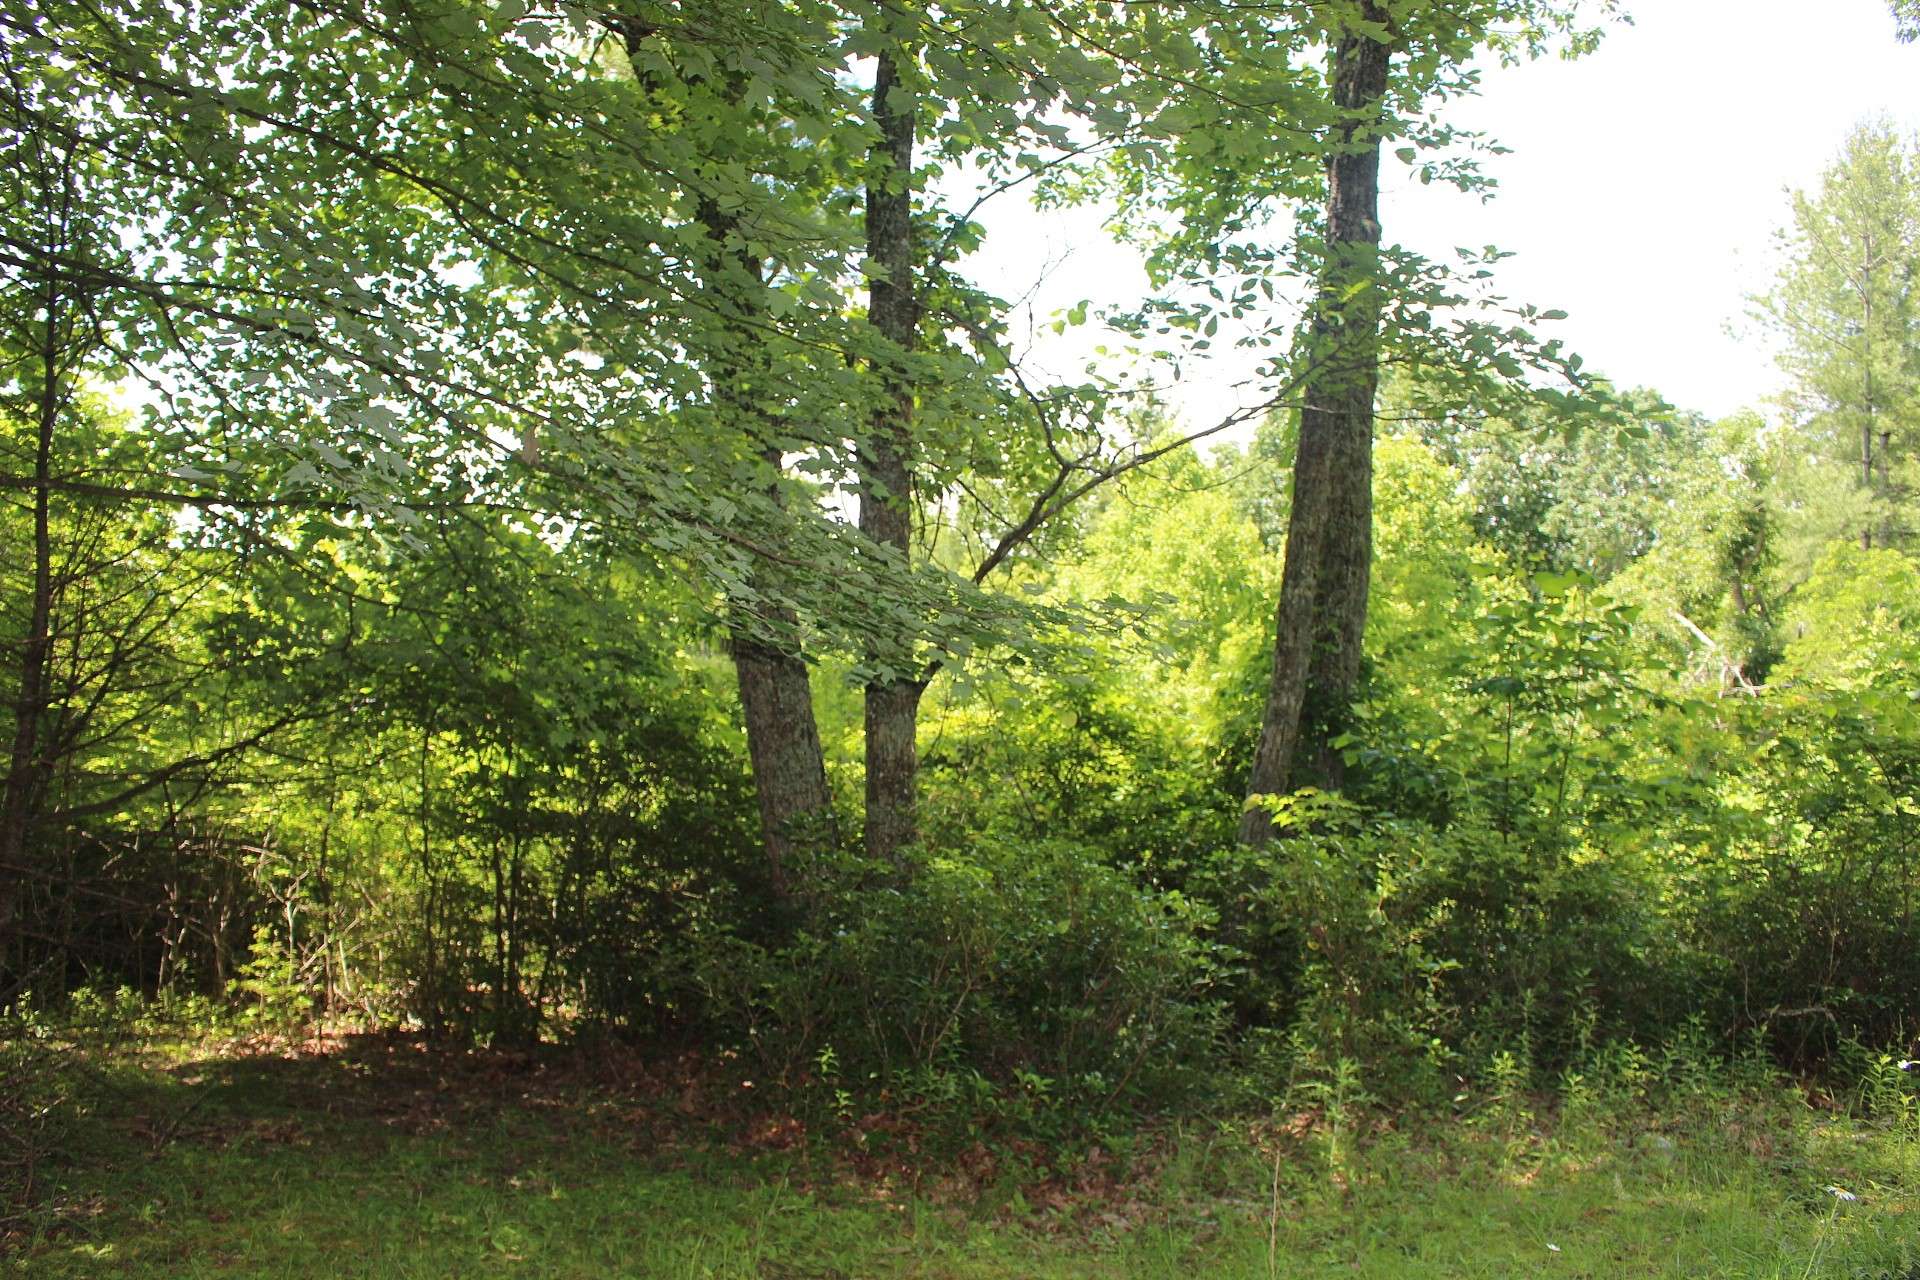 Lots  3 and 4 combined make a great homesite.  These mountain homesites offer road frontage and a great place to build your NC Mountain retreat or primary residence.